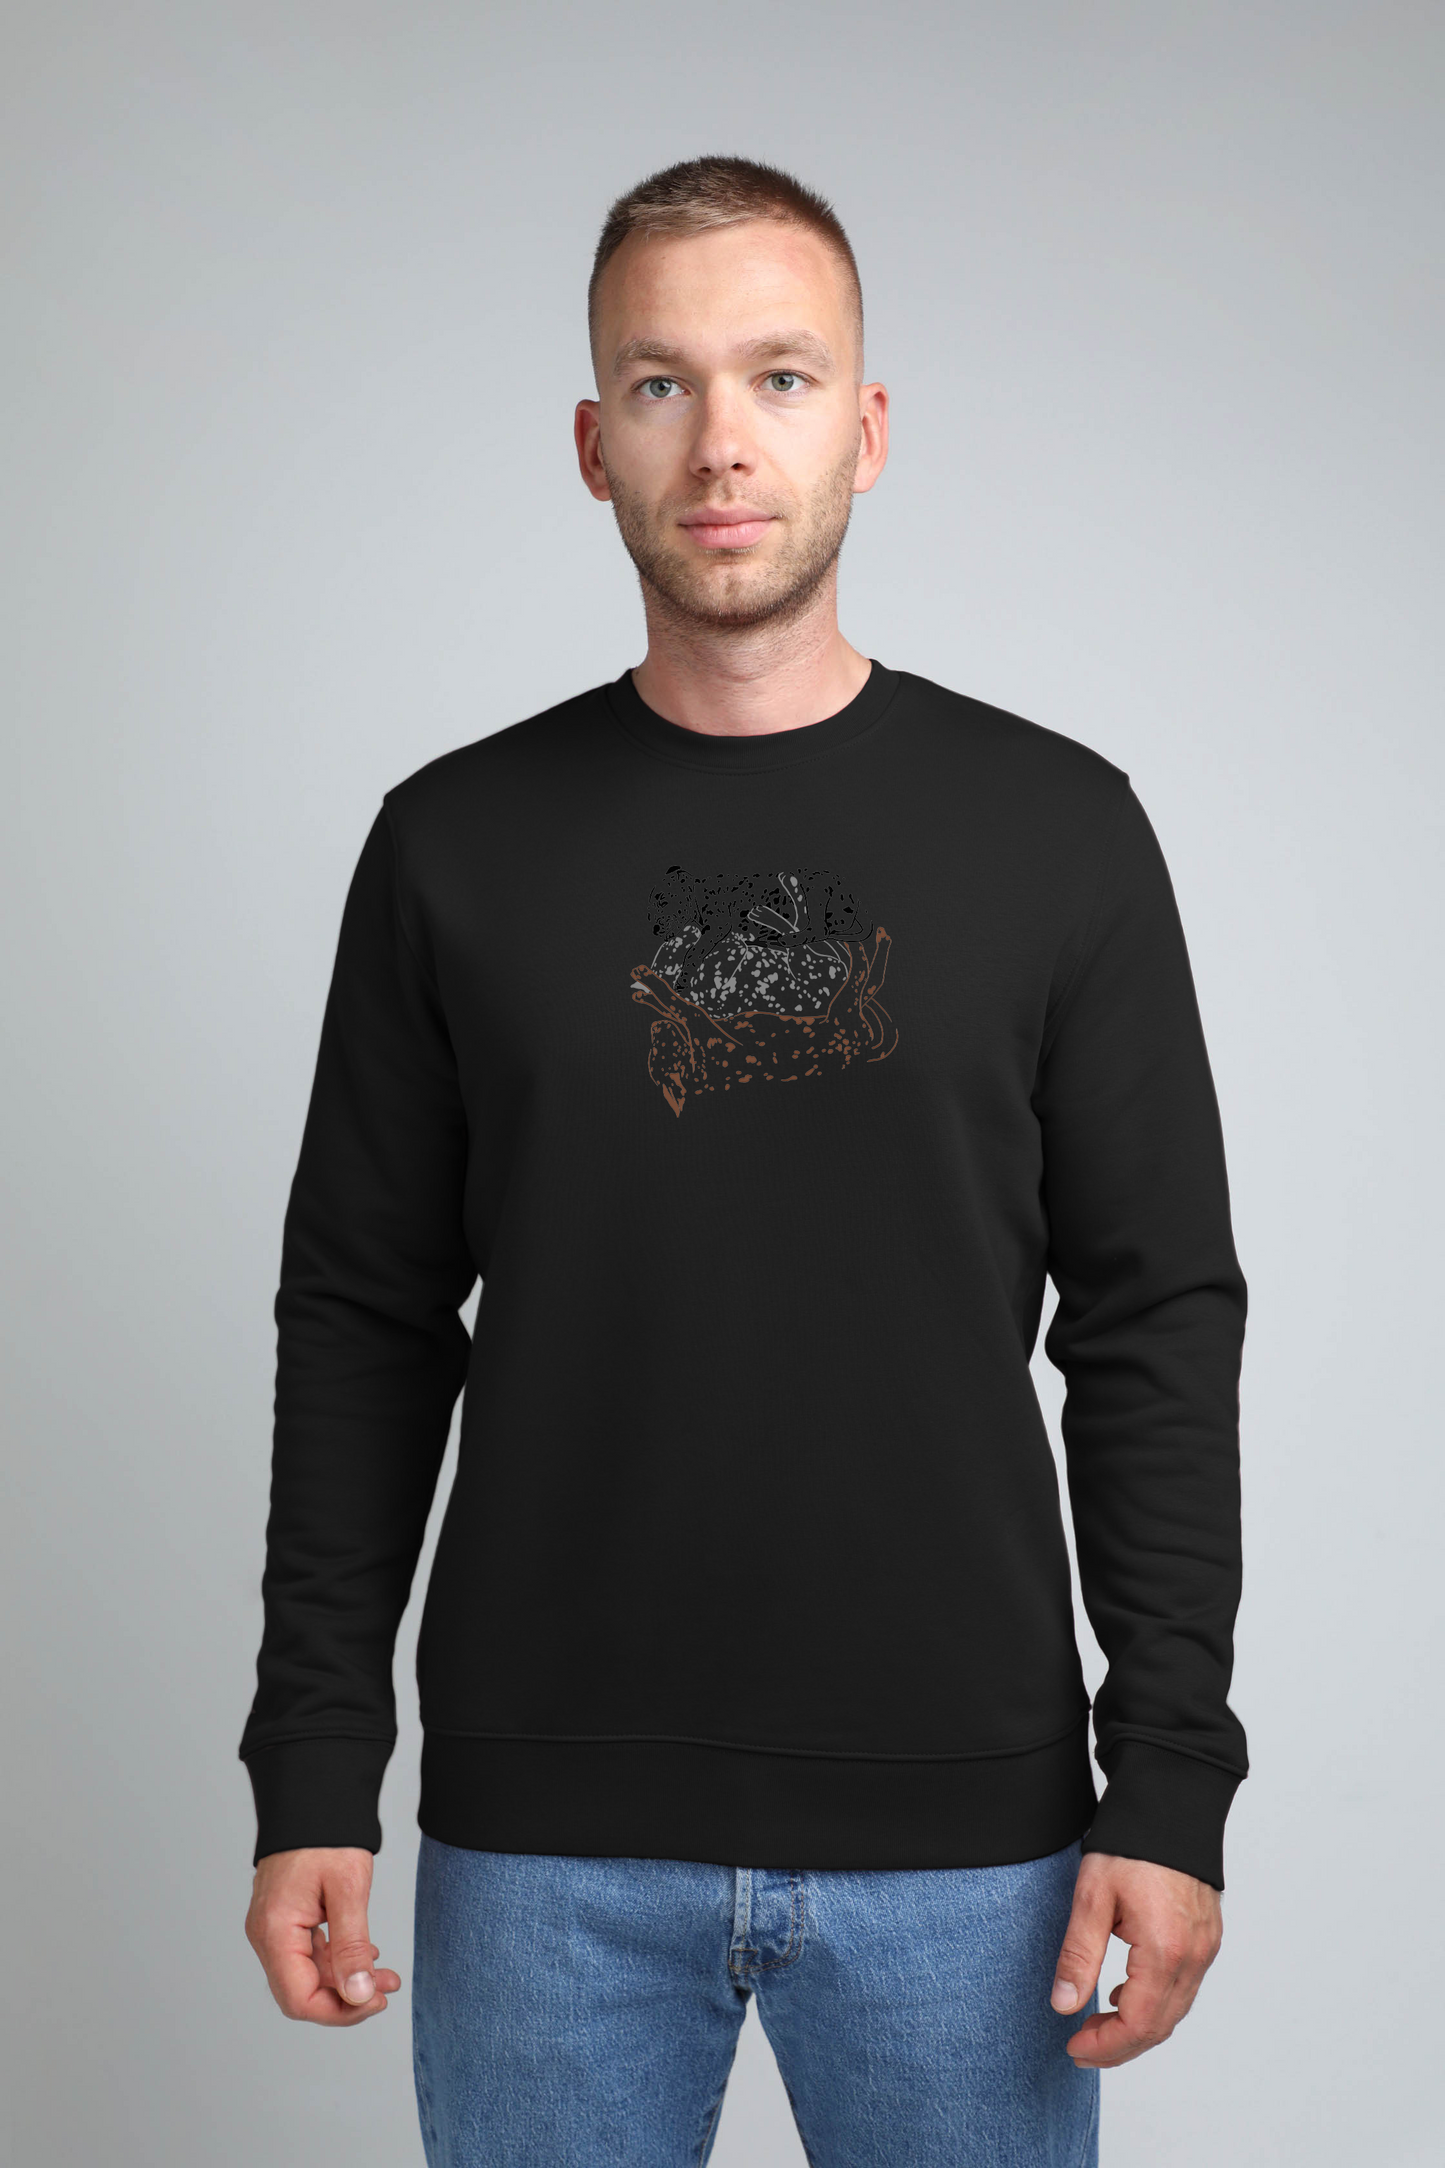 Hugging puppies | Crew neck sweatshirt with dogs. Regular fit | Unisex by My Wild Other